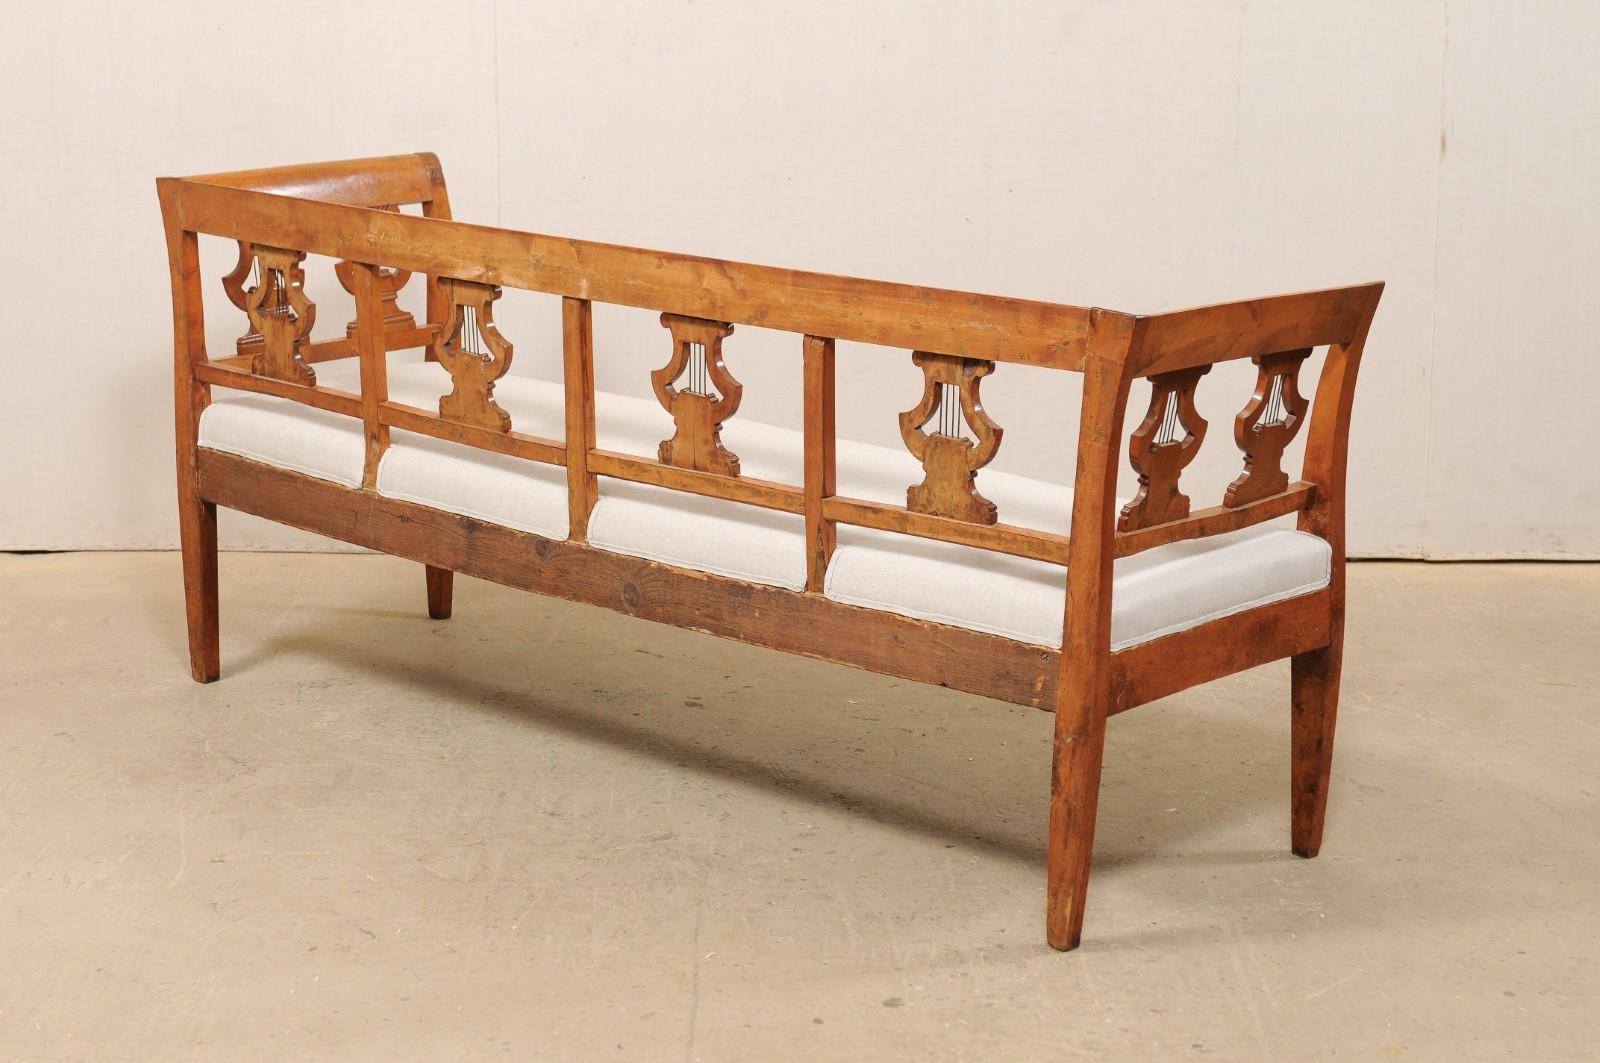 Linen Swedish Neoclassical Style Birchwood Sofa Bench with Lyre Carvings, Mid-19th C